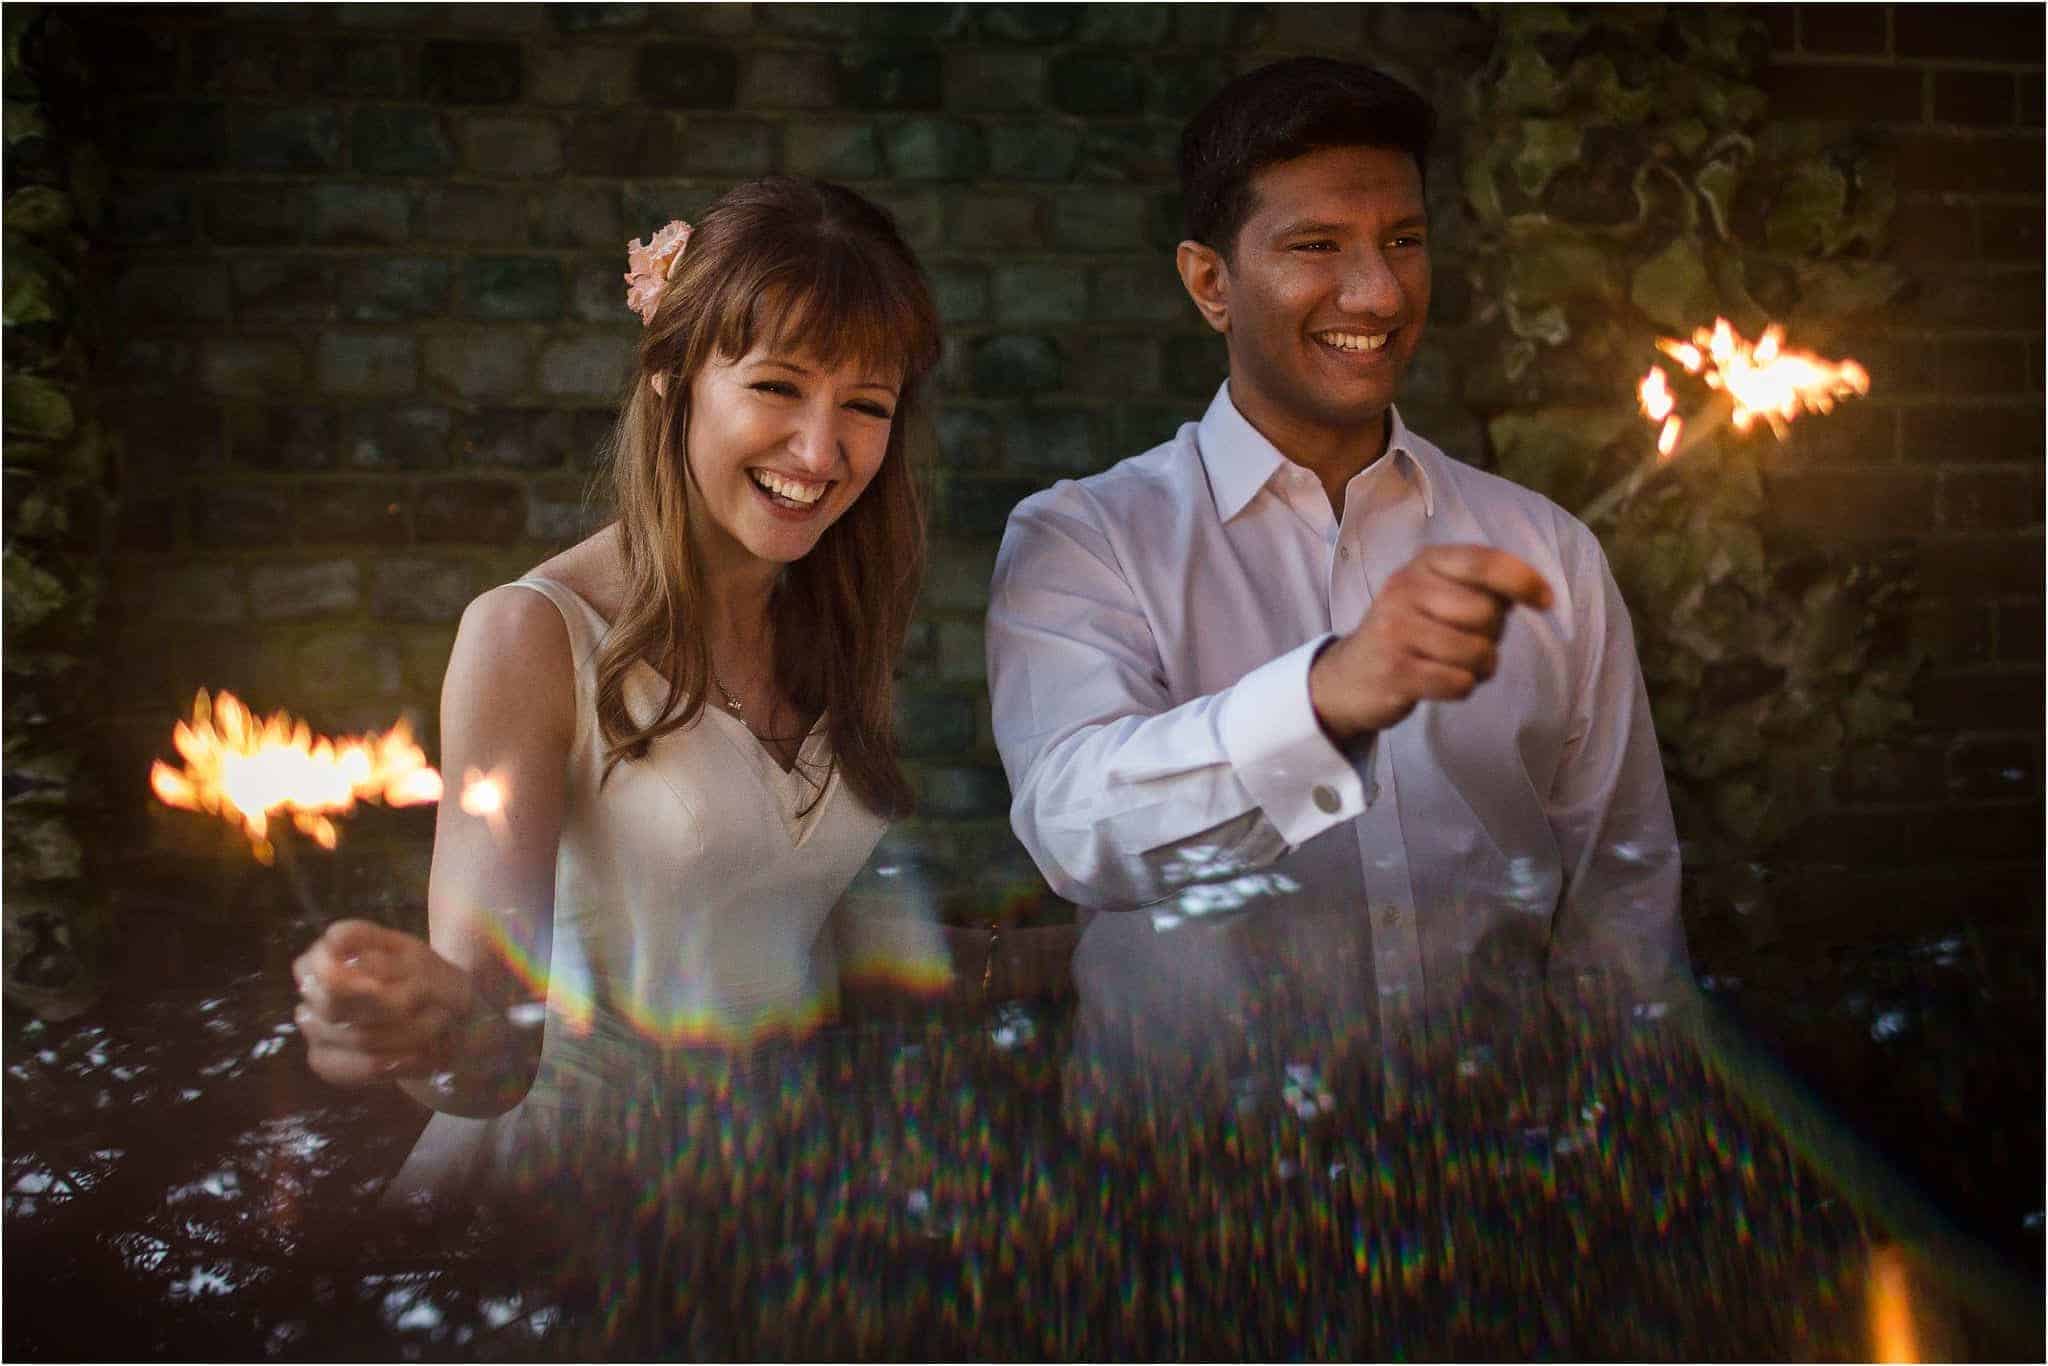 A bride and groom playing with sparklers on their wedding day. Image by S2 Images, Hampden House Wedding Photographer